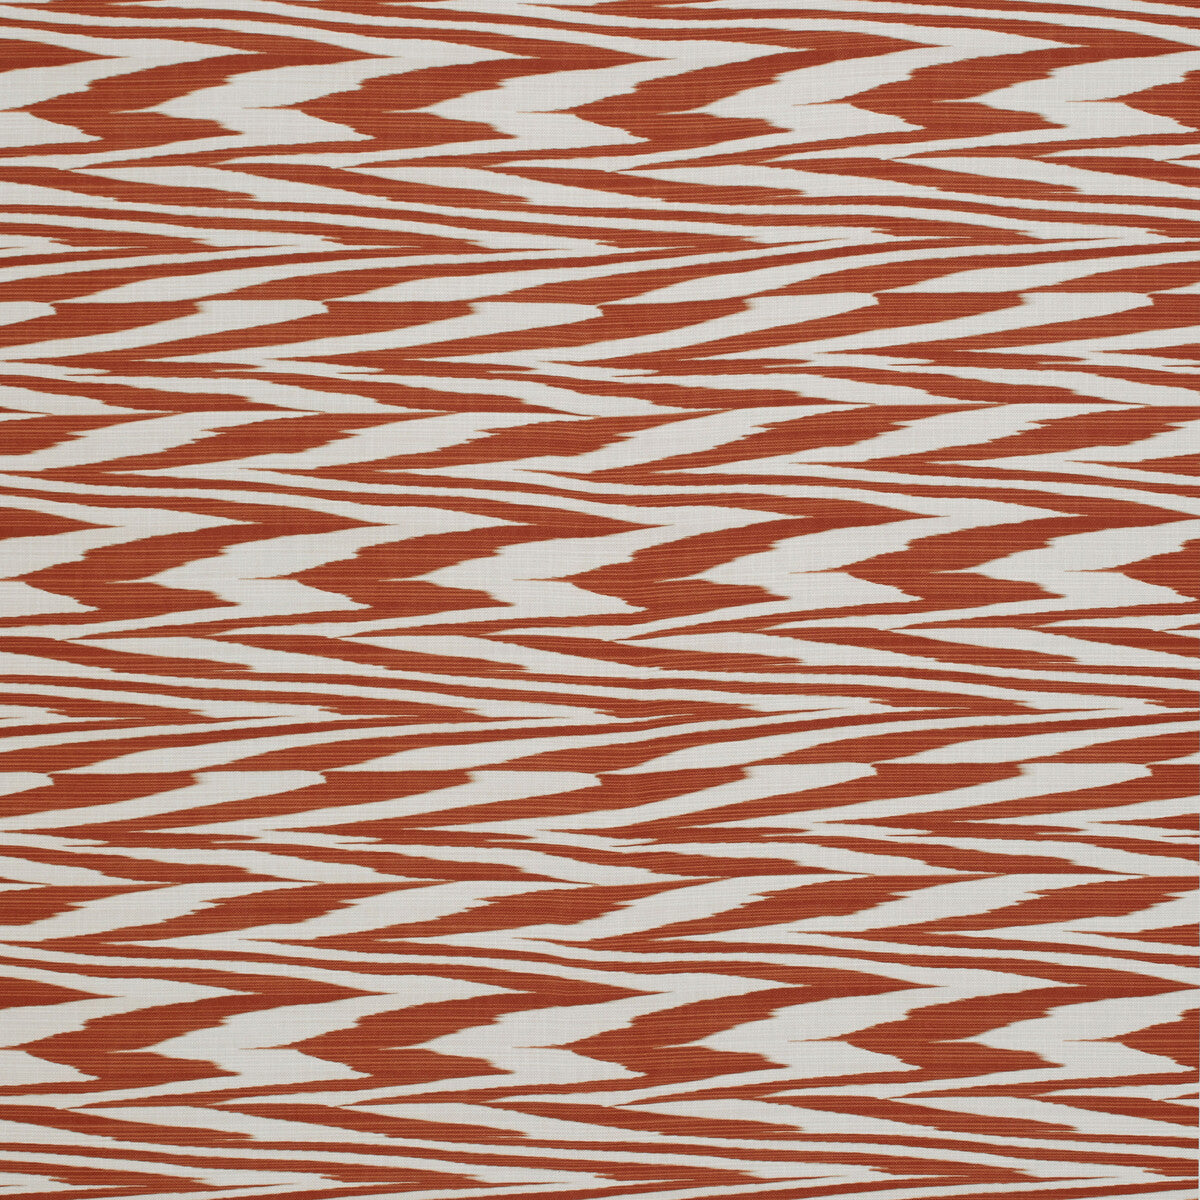 Atacama Outdoor fabric in 591 color - pattern 36156.12.0 - by Kravet Couture in the Missoni Home 2021 collection